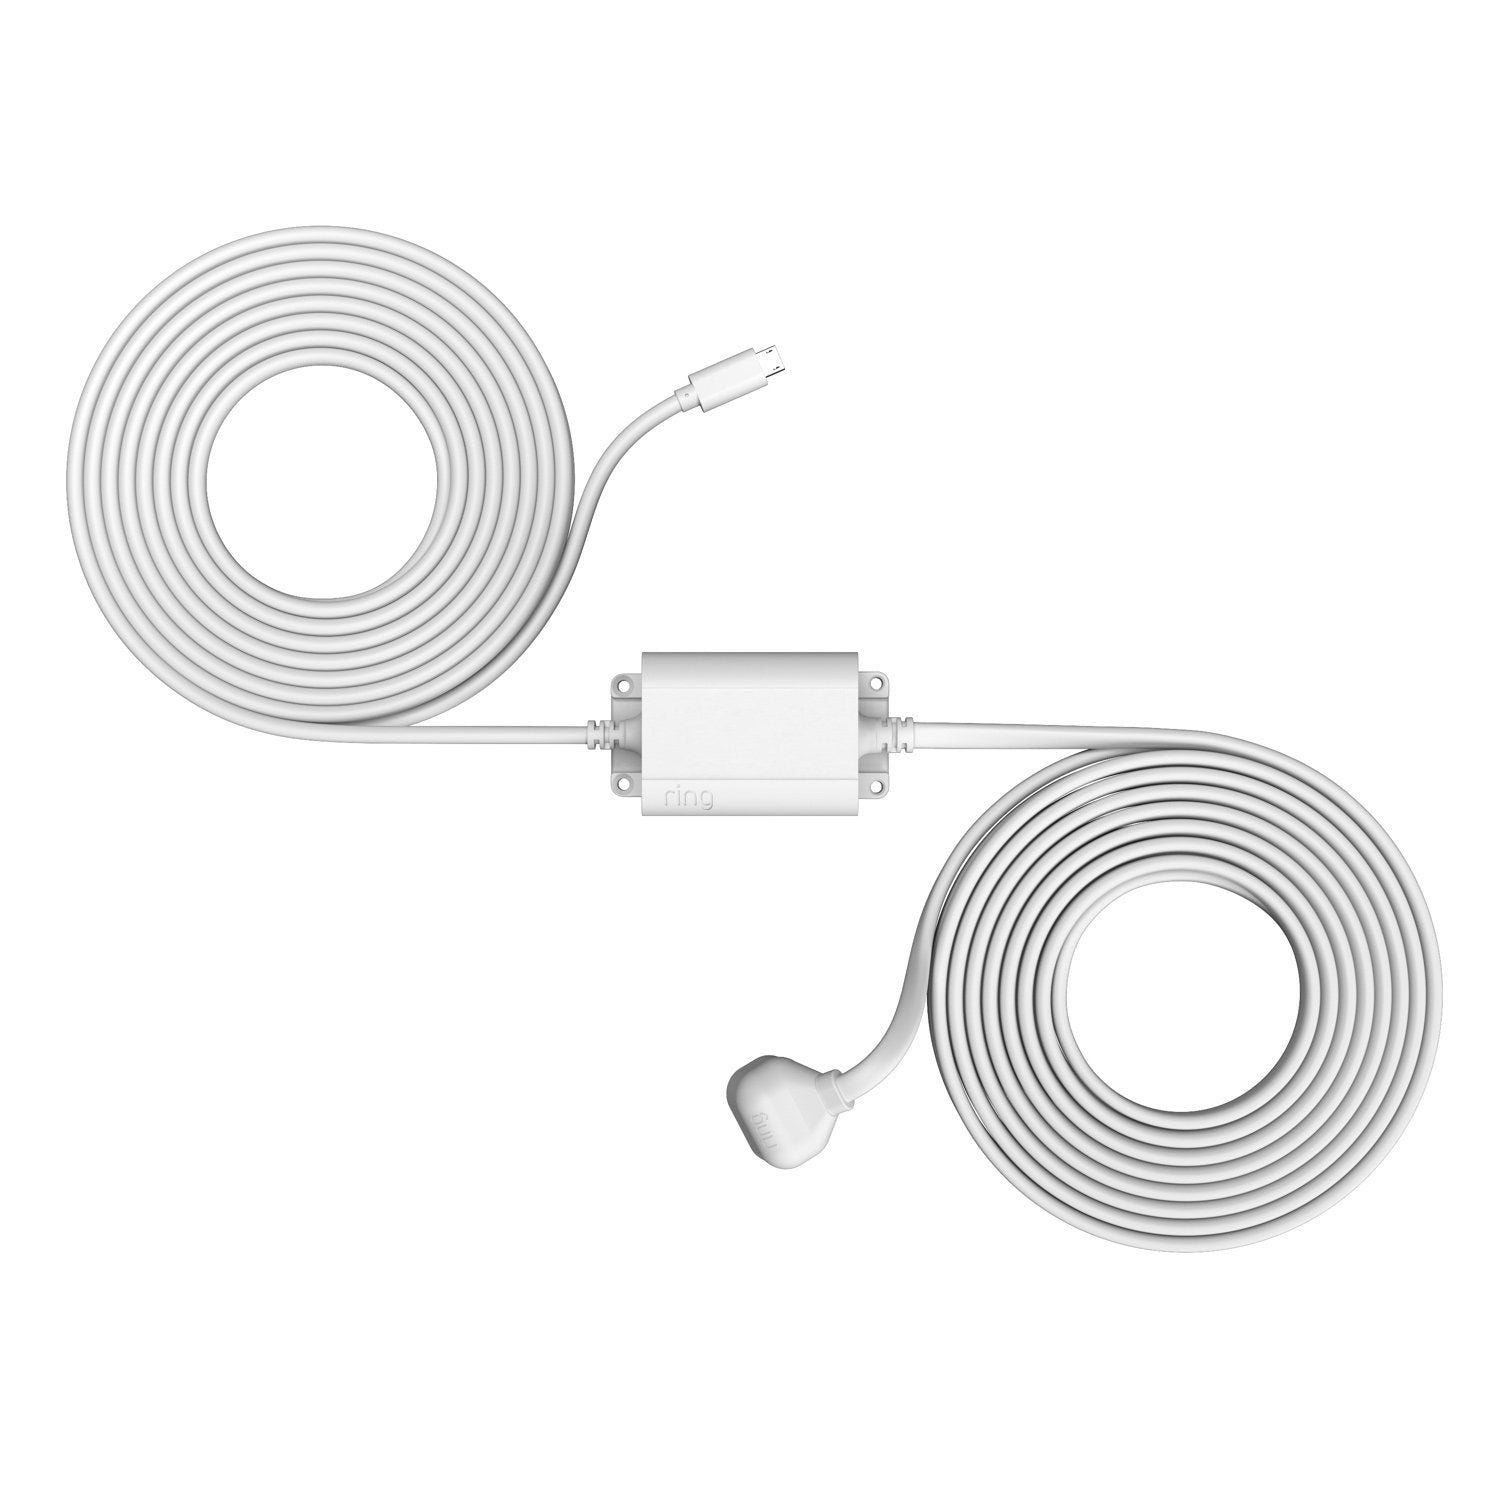 Indoor/Outdoor Power Adapter (Micro USB) (for Stick Up Cam Wired, Stick Up Cam Elite) - White